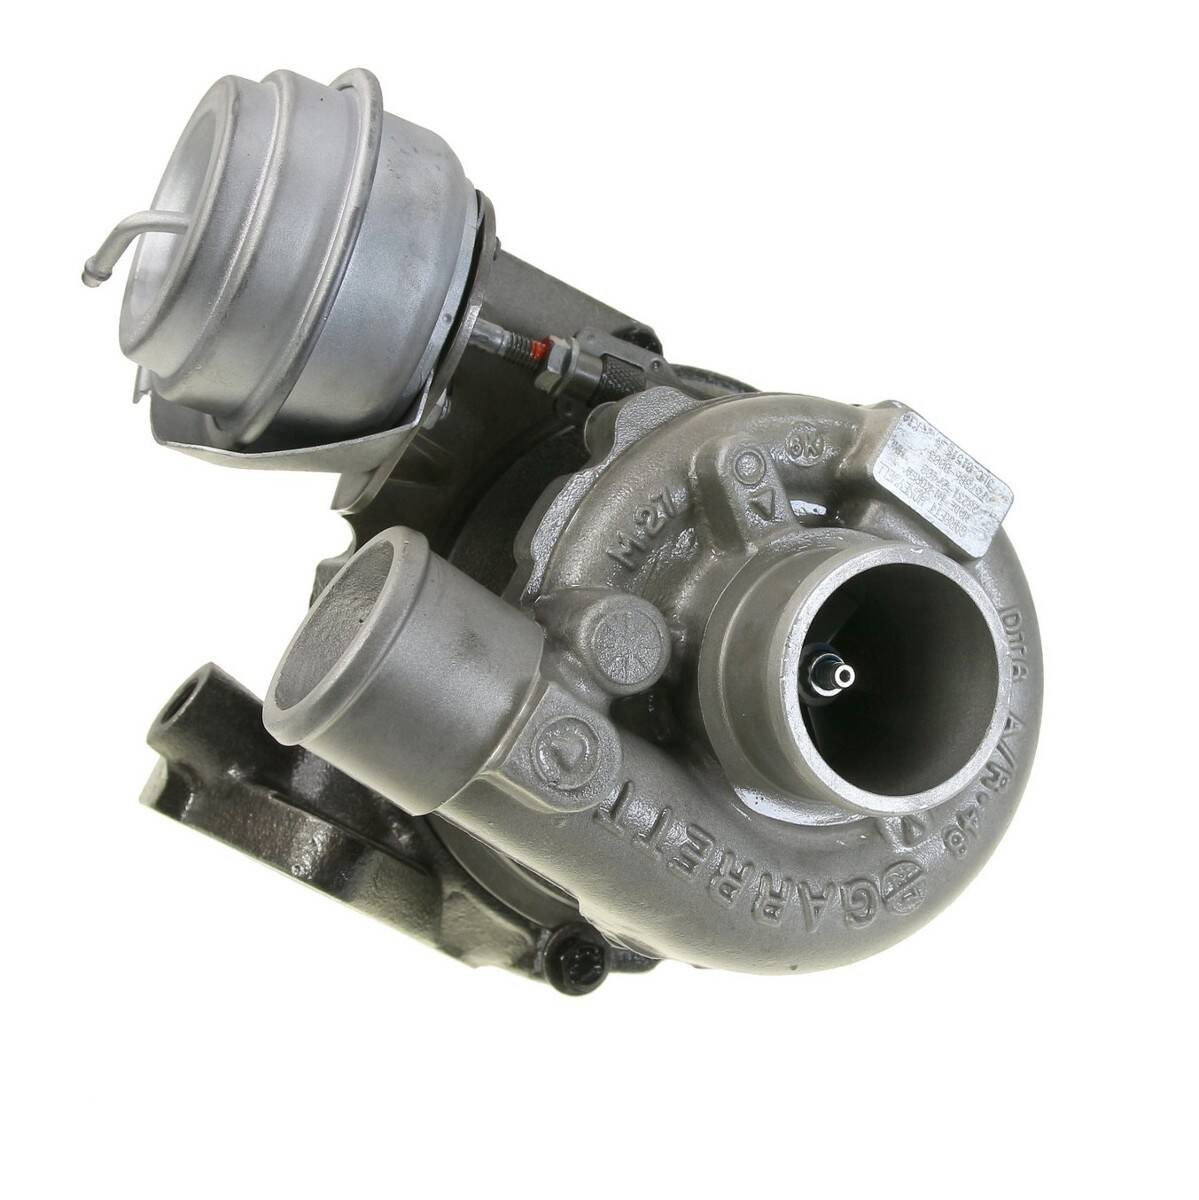 TURBOCHARGER TURBO REMANUFACTURED 757886-0003 28231-27400 -0003